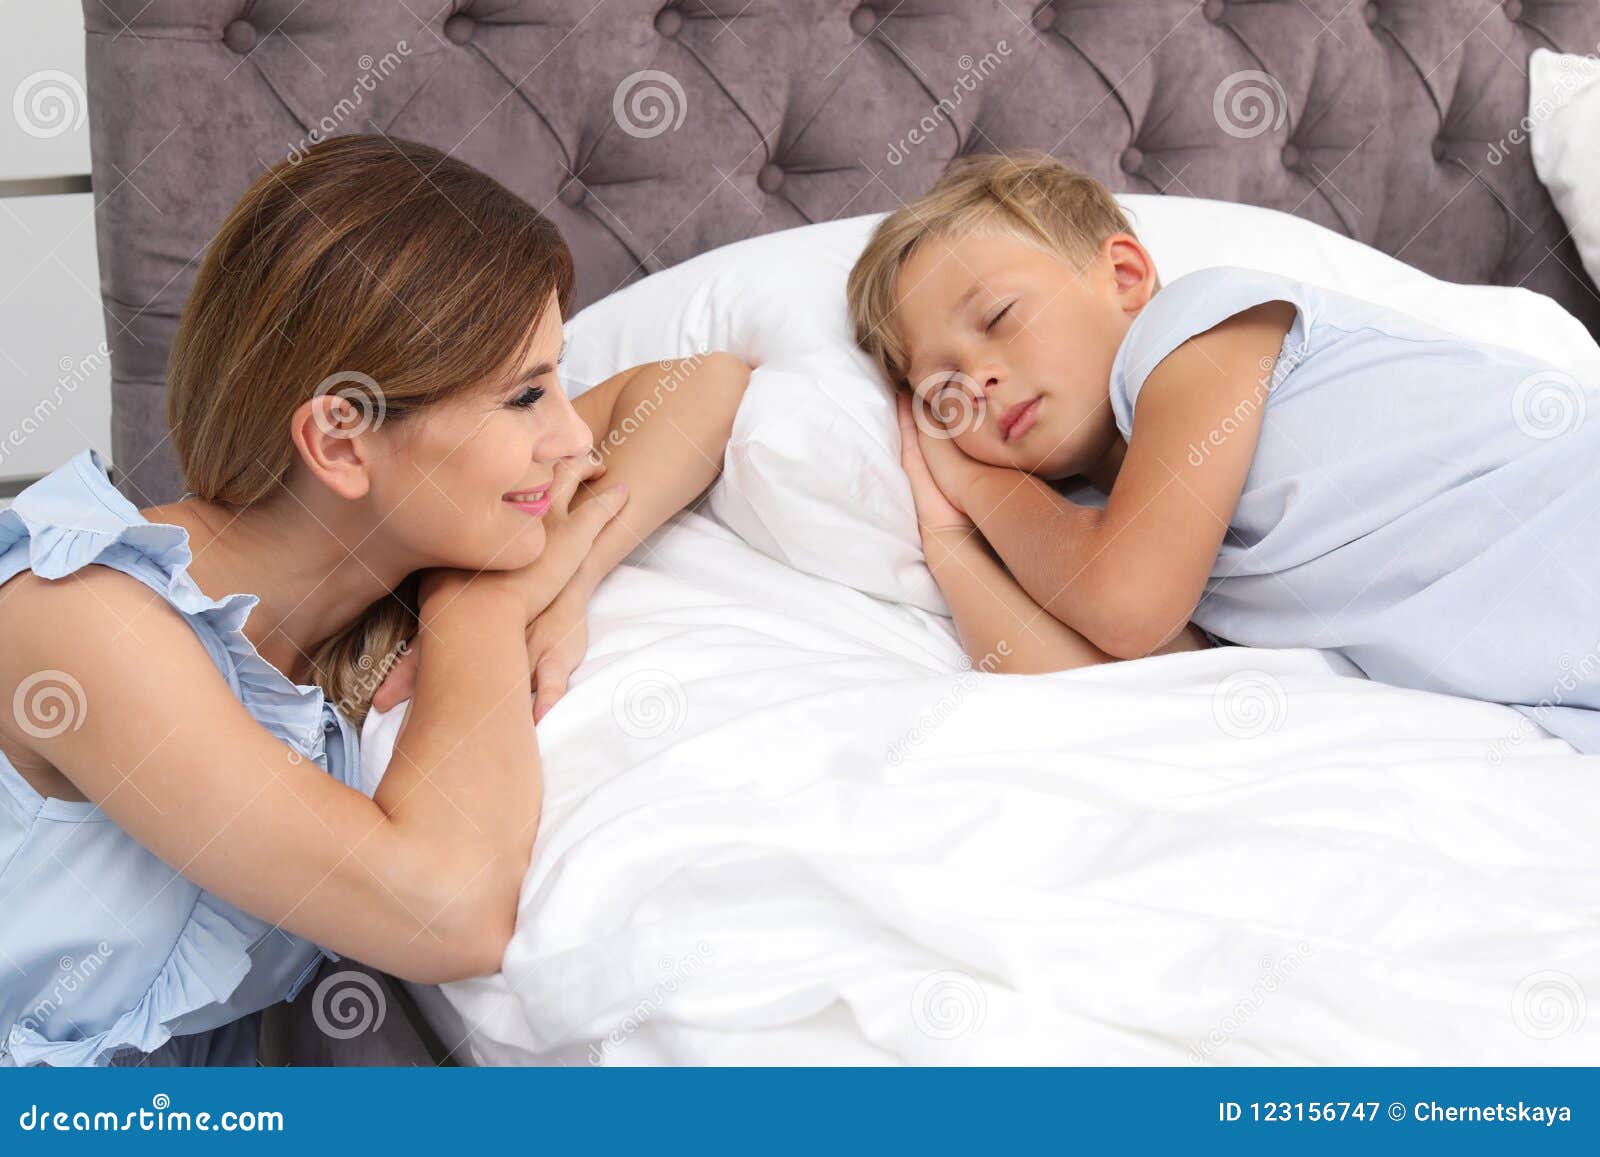 Mother Watching Her Son Sleep In Bed Stock Image Image Of Parent